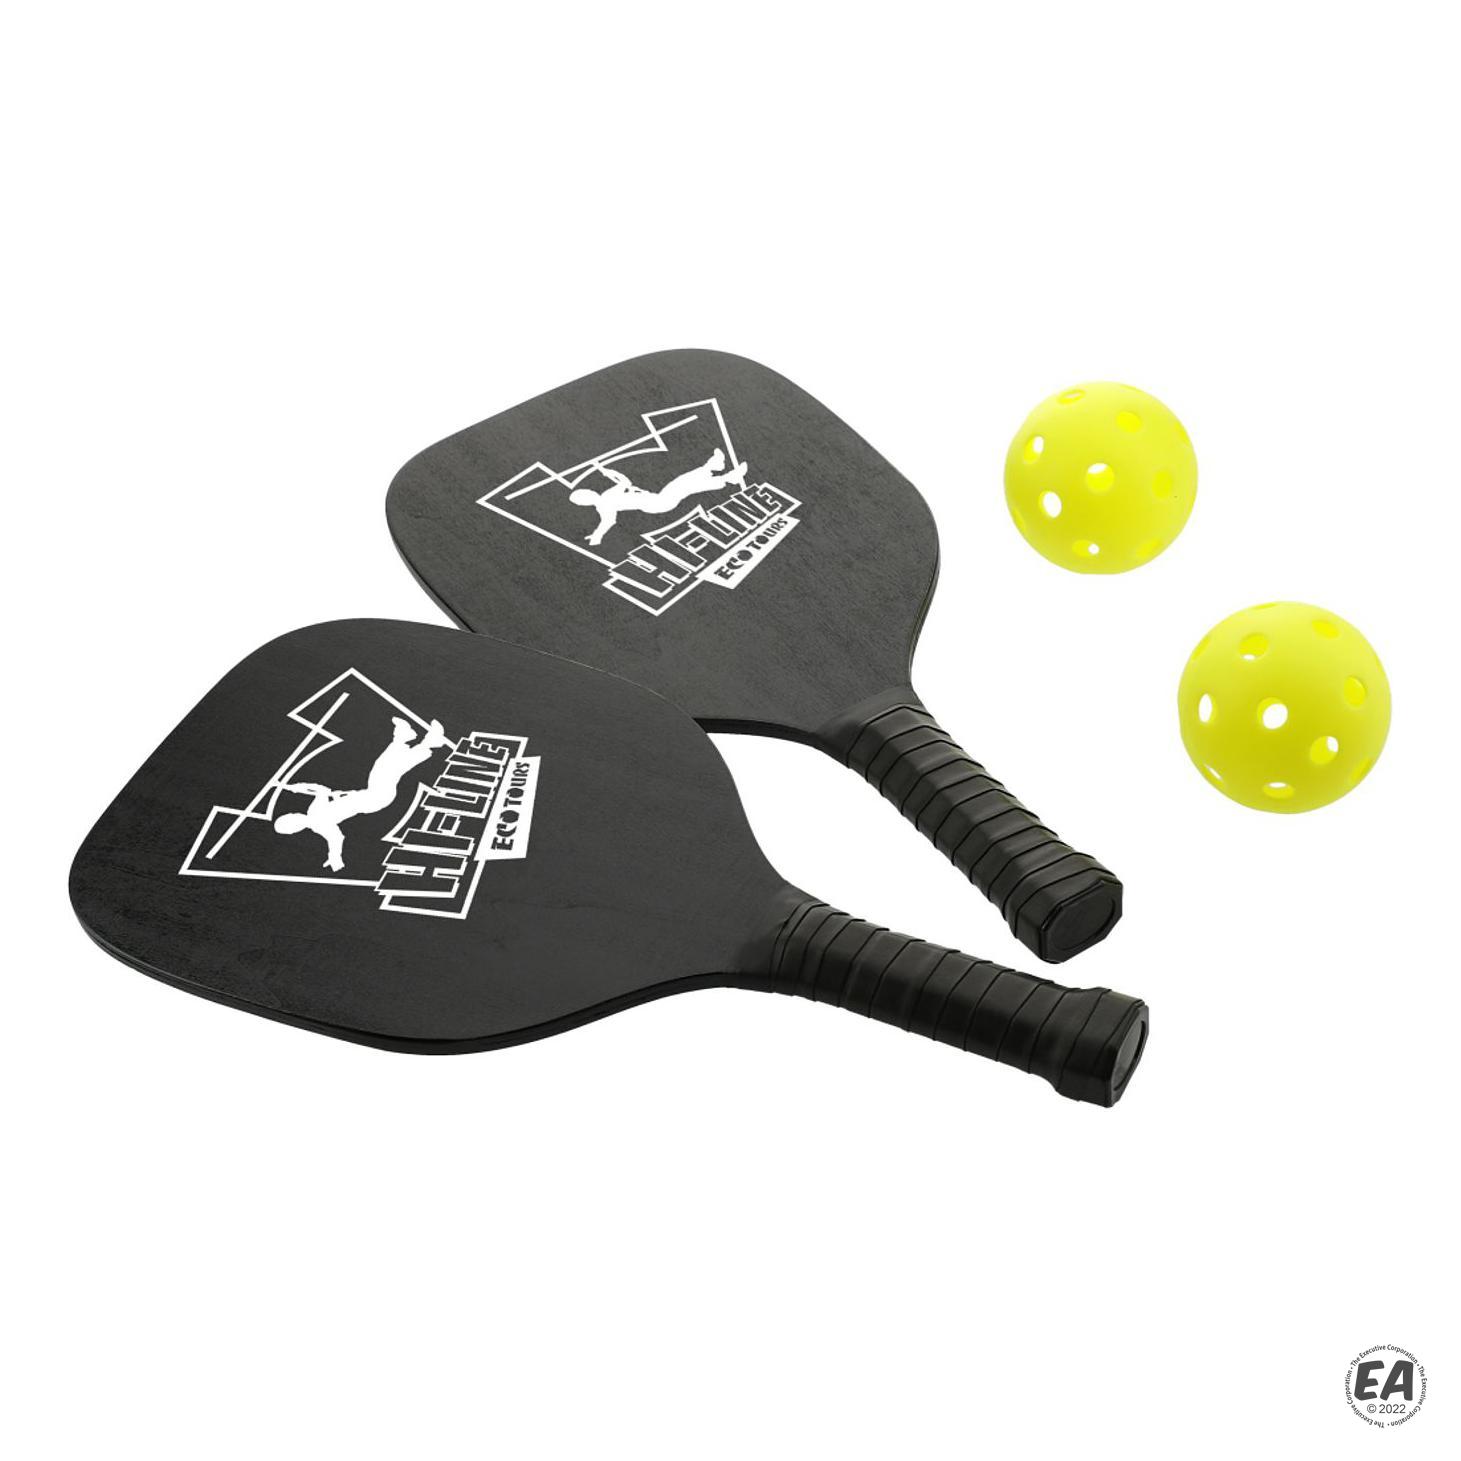 Branded Pickleball Paddle and Ball Set | Customized Games | Promotional ...